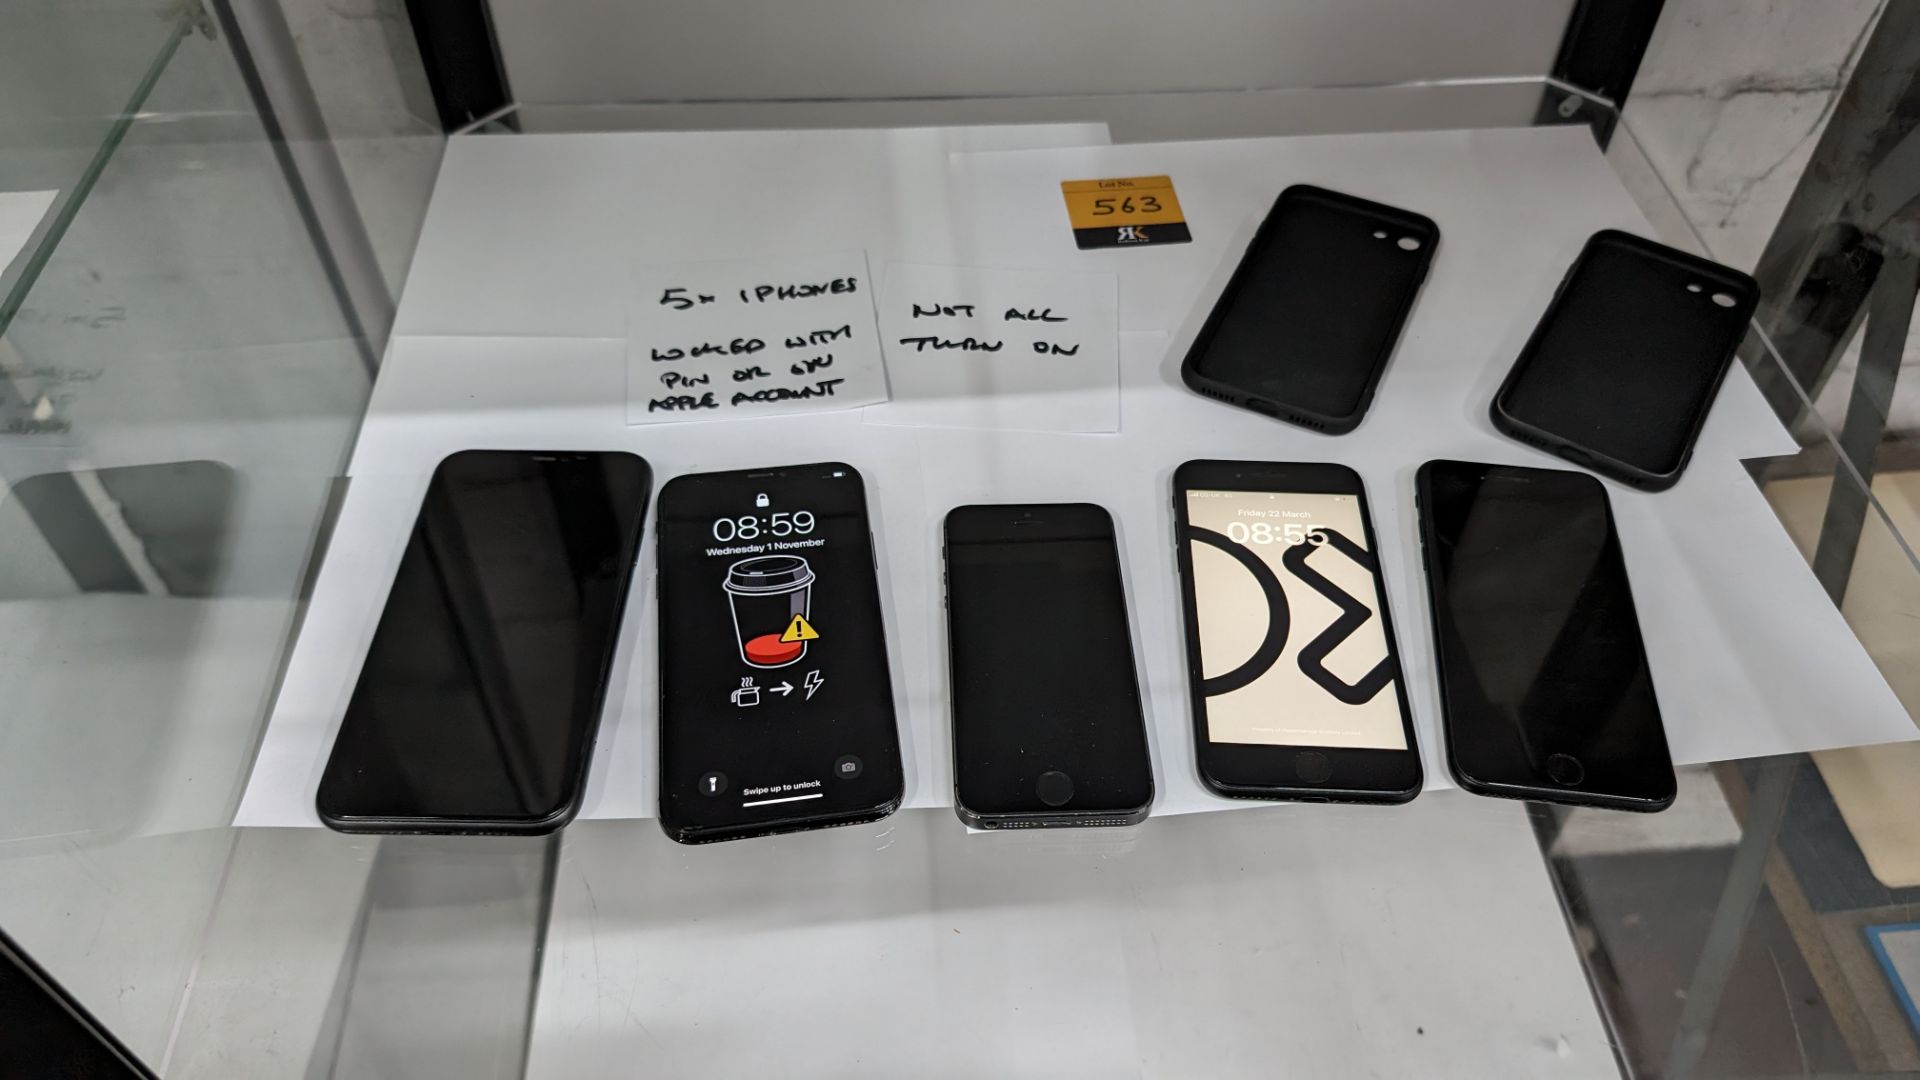 5 off assorted iPhones - these all belonged to a company in Liquidation. However, they are all lock - Image 13 of 13